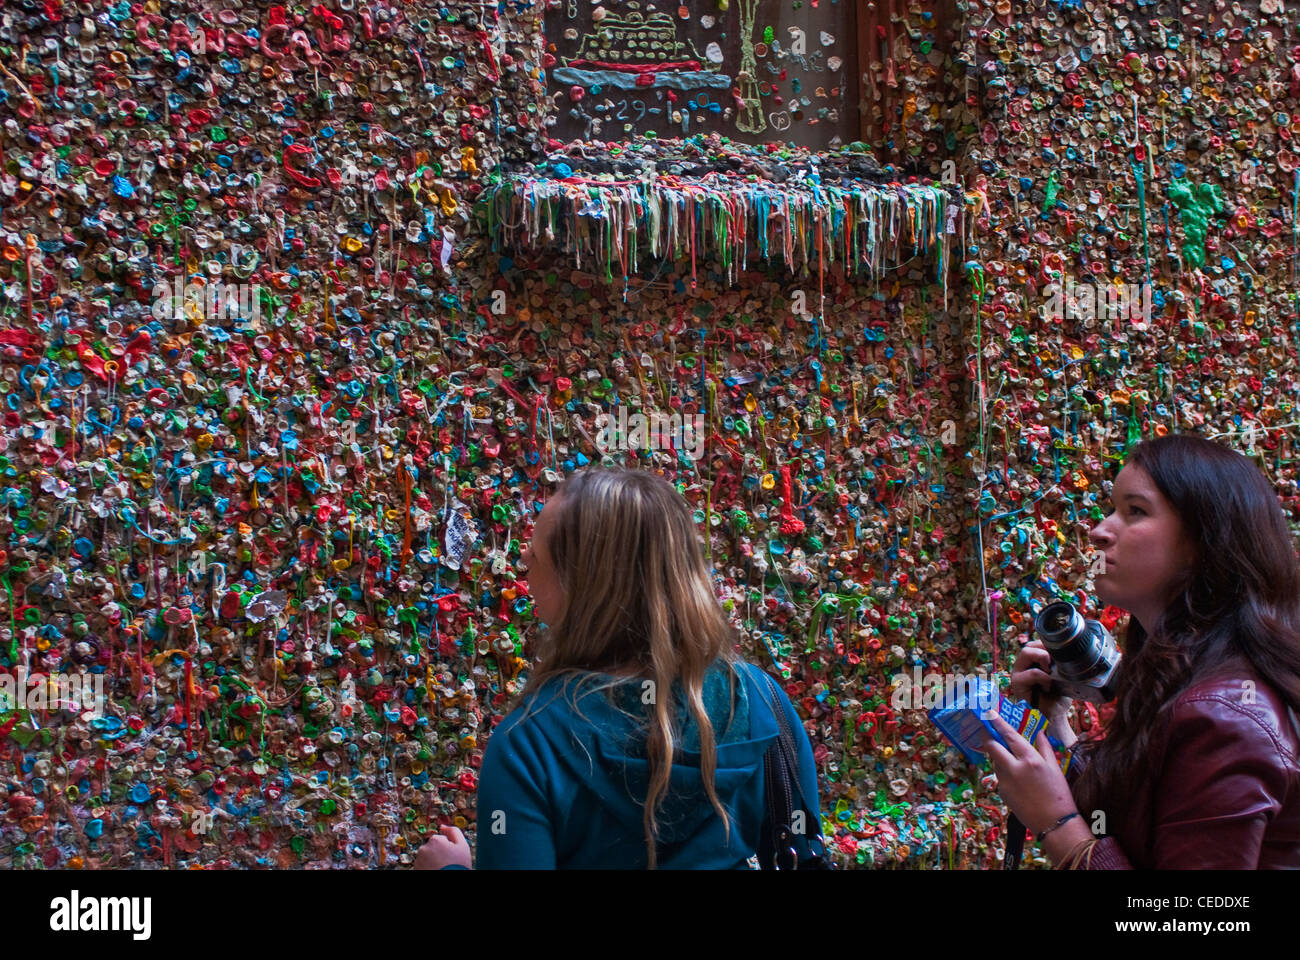 Two Women With A Camera And Bag Of Gum At Gum Wall Lower Level Pike Place Market Seattle WA Stock Photo